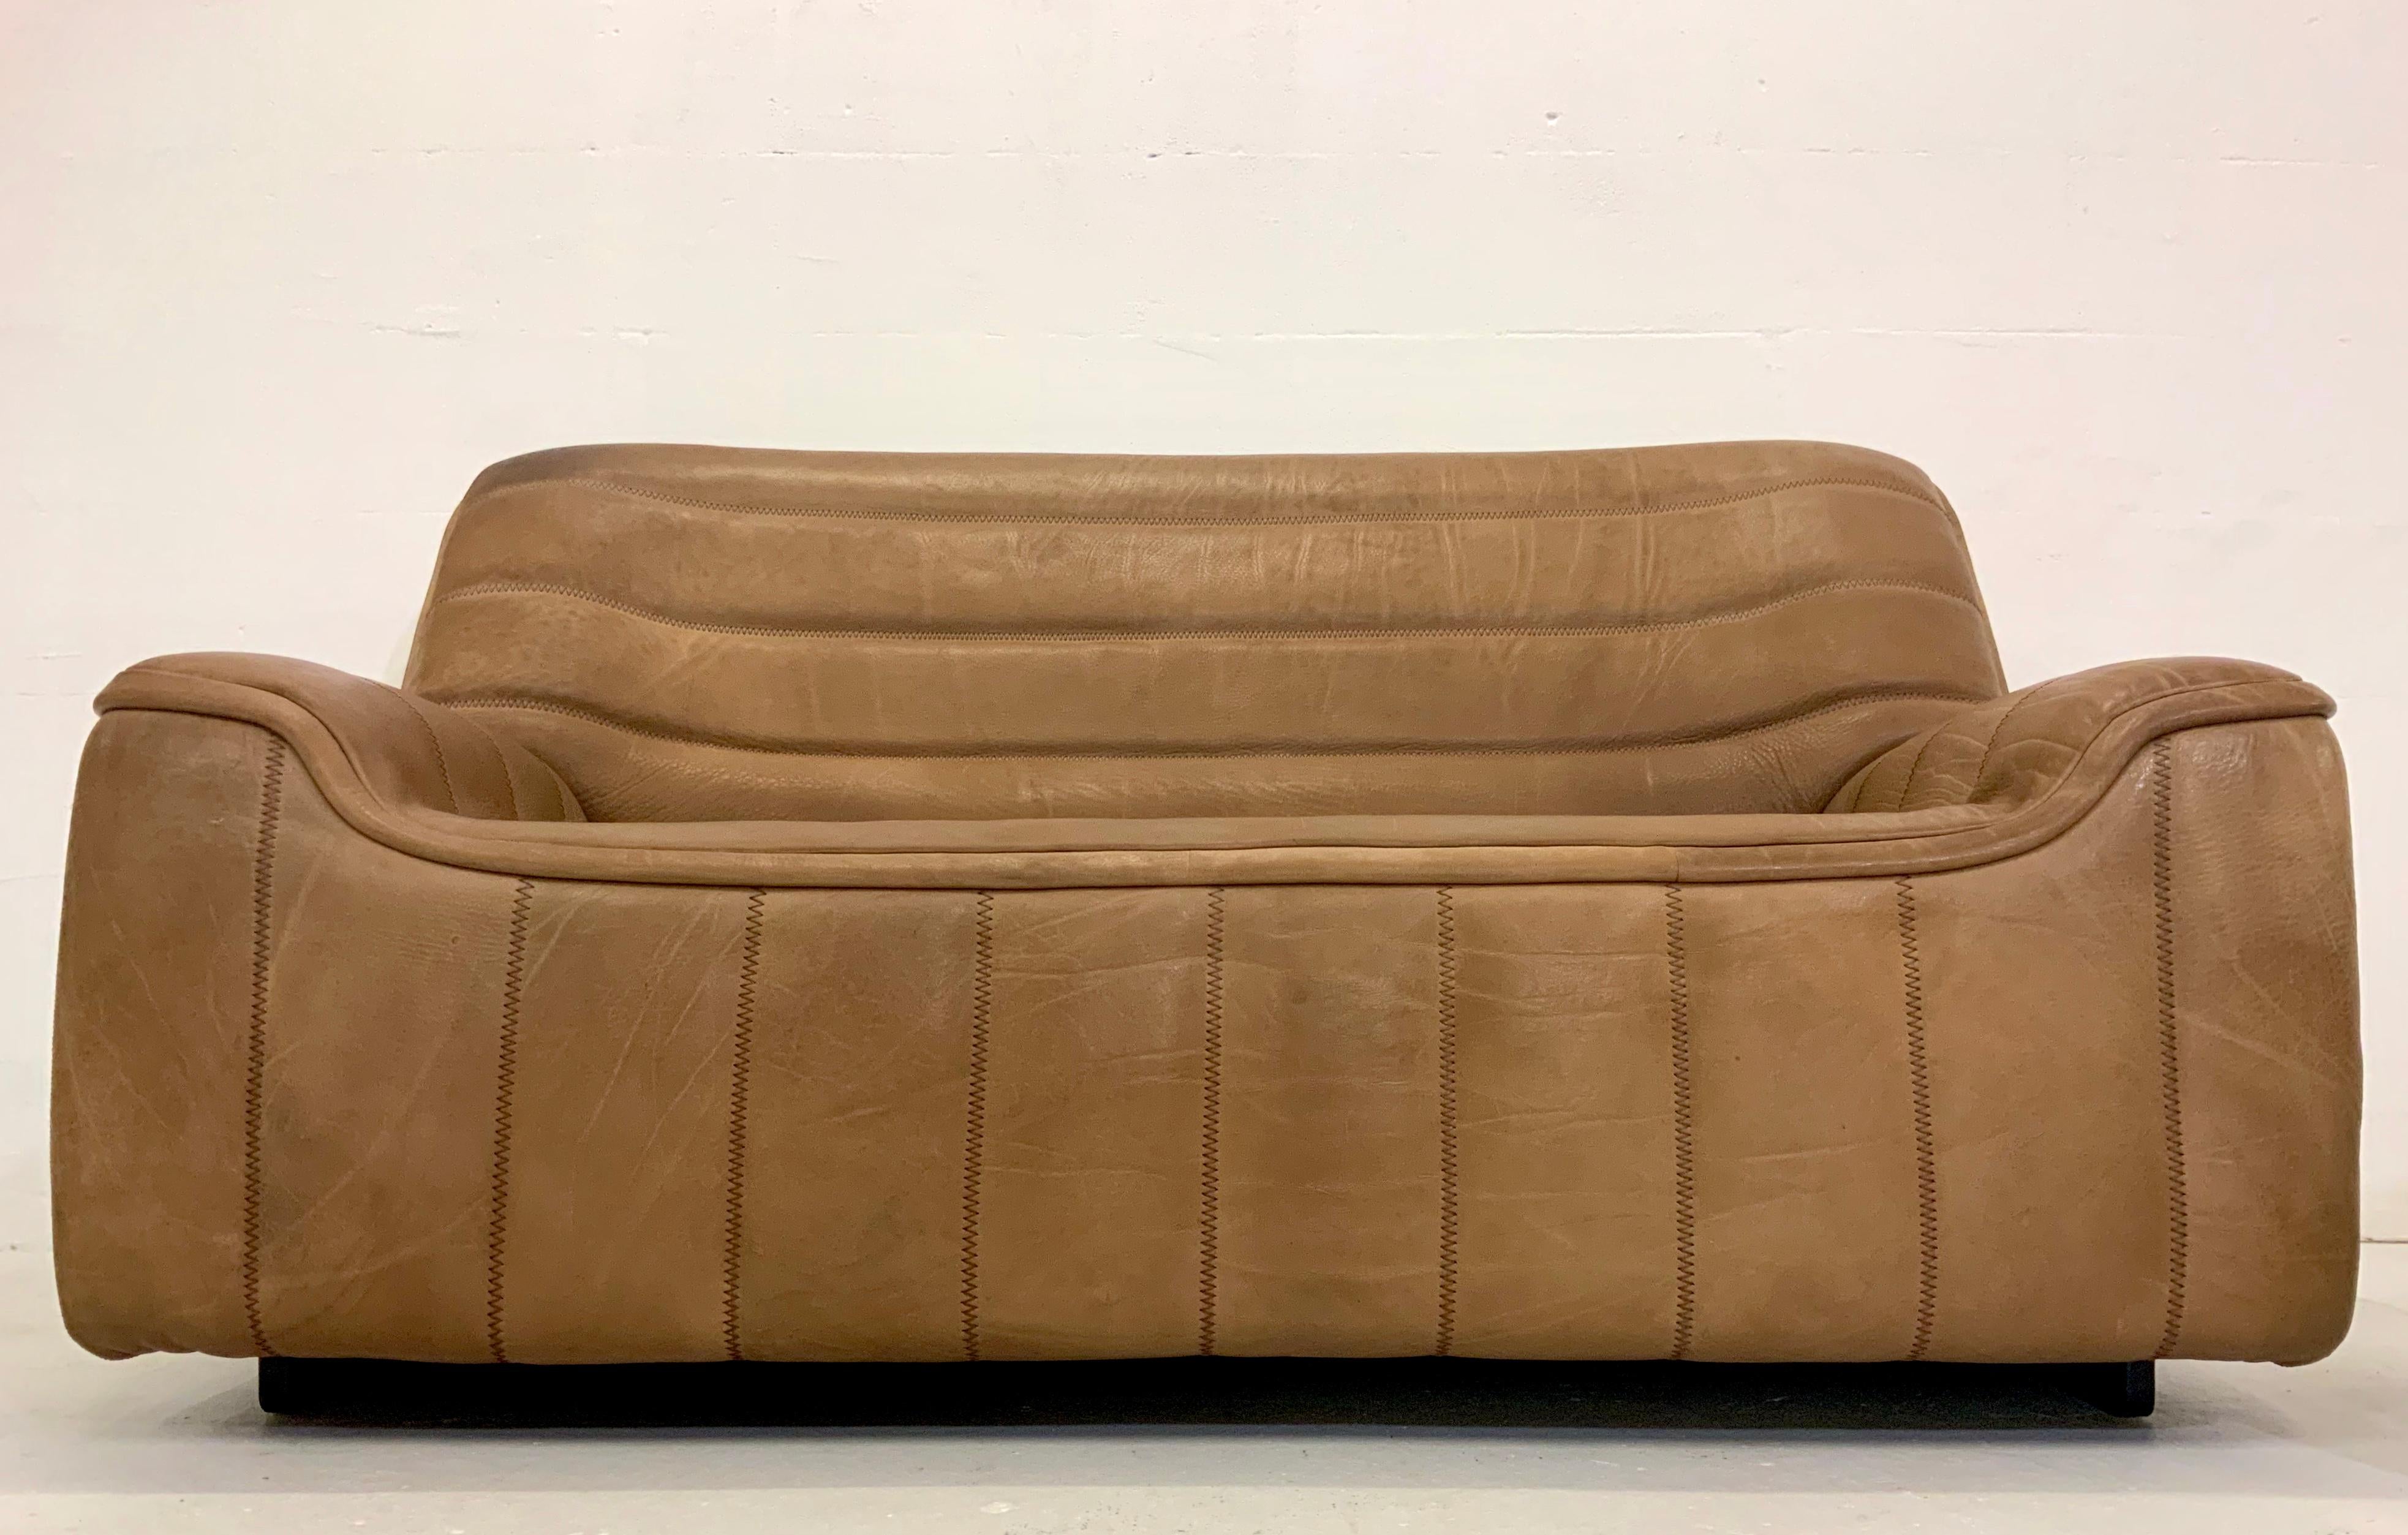 The vintage DS-84 model is a coveted and a very rare leather sofa classic, designed in the midcentury era in early 1970s,
by the renowned leather craftsman manufacturer in Switzerland the luxury brand De Sede.

+ Perfect craftsmanship
+ Enough space